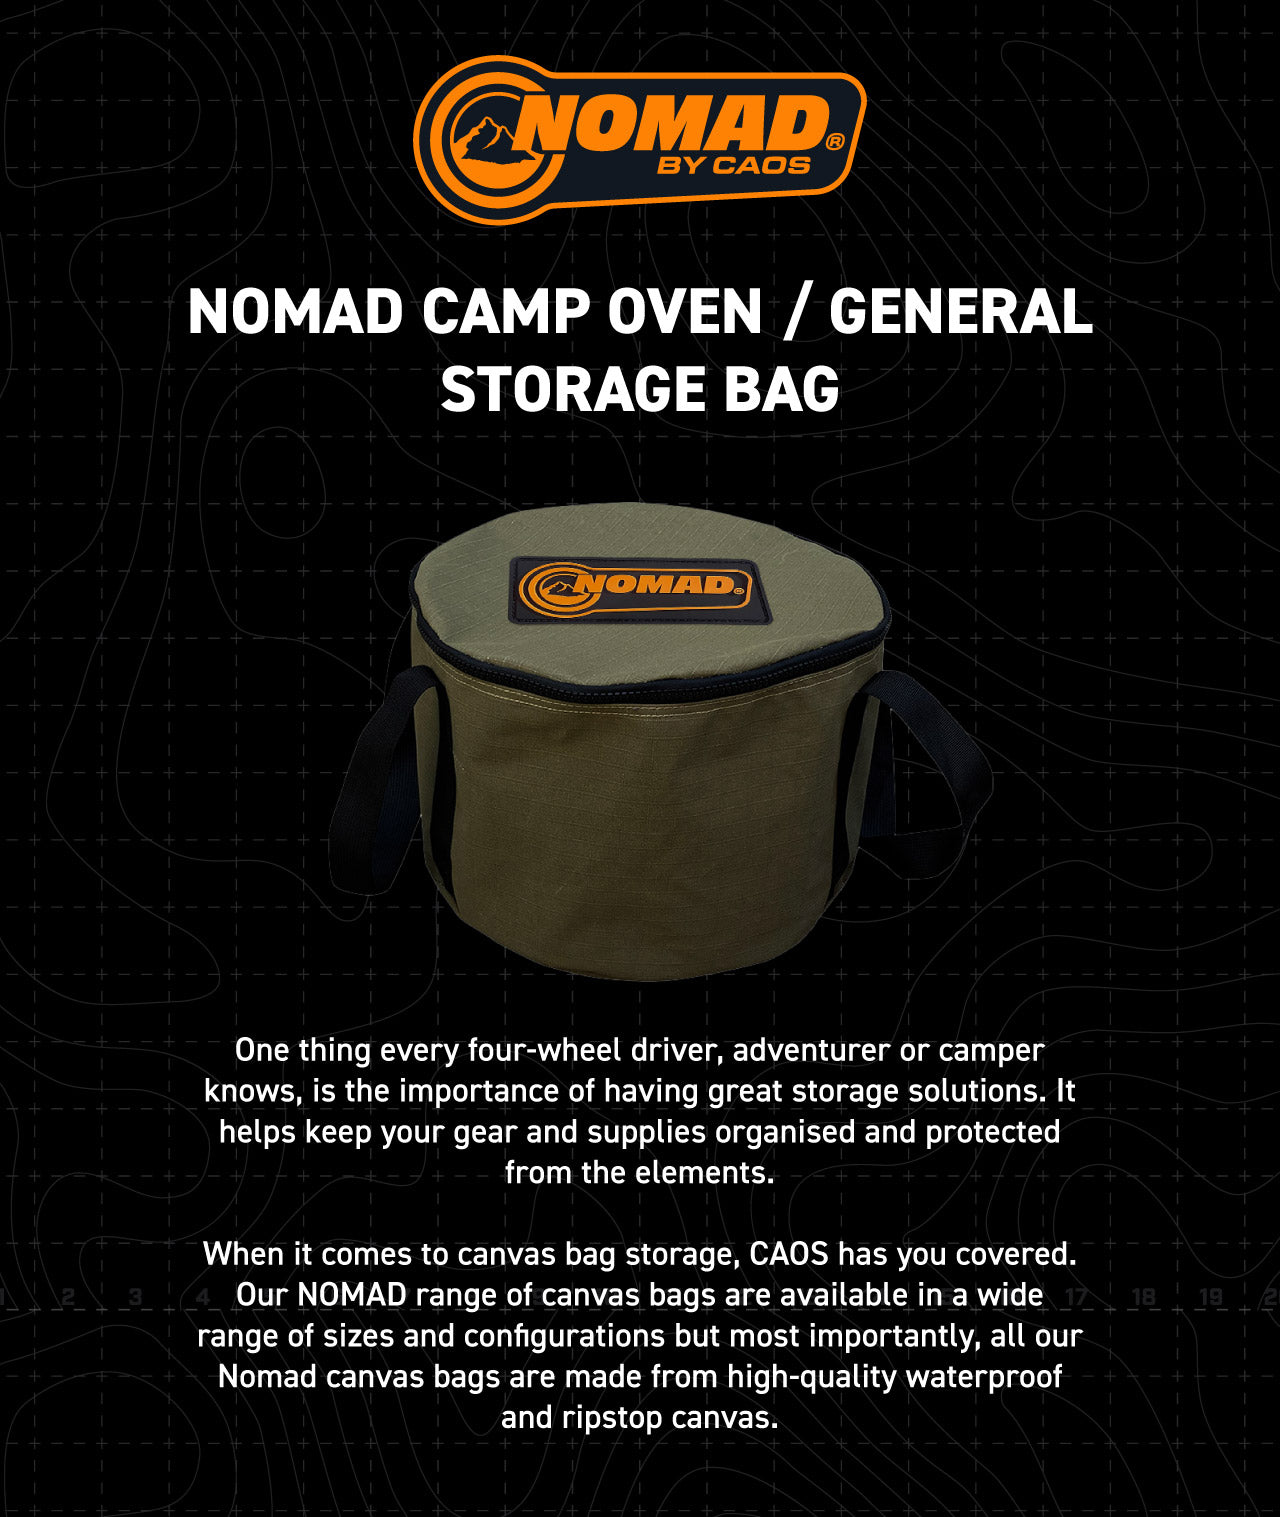 When it comes to canvas bag storage, CAOS has you covered. Our NOMAD range of canvas bags are available in a wide range of sizes and configurations but most importantly, all our Nomad canvas bags are made from high-quality waterproof and ripstop canvas.